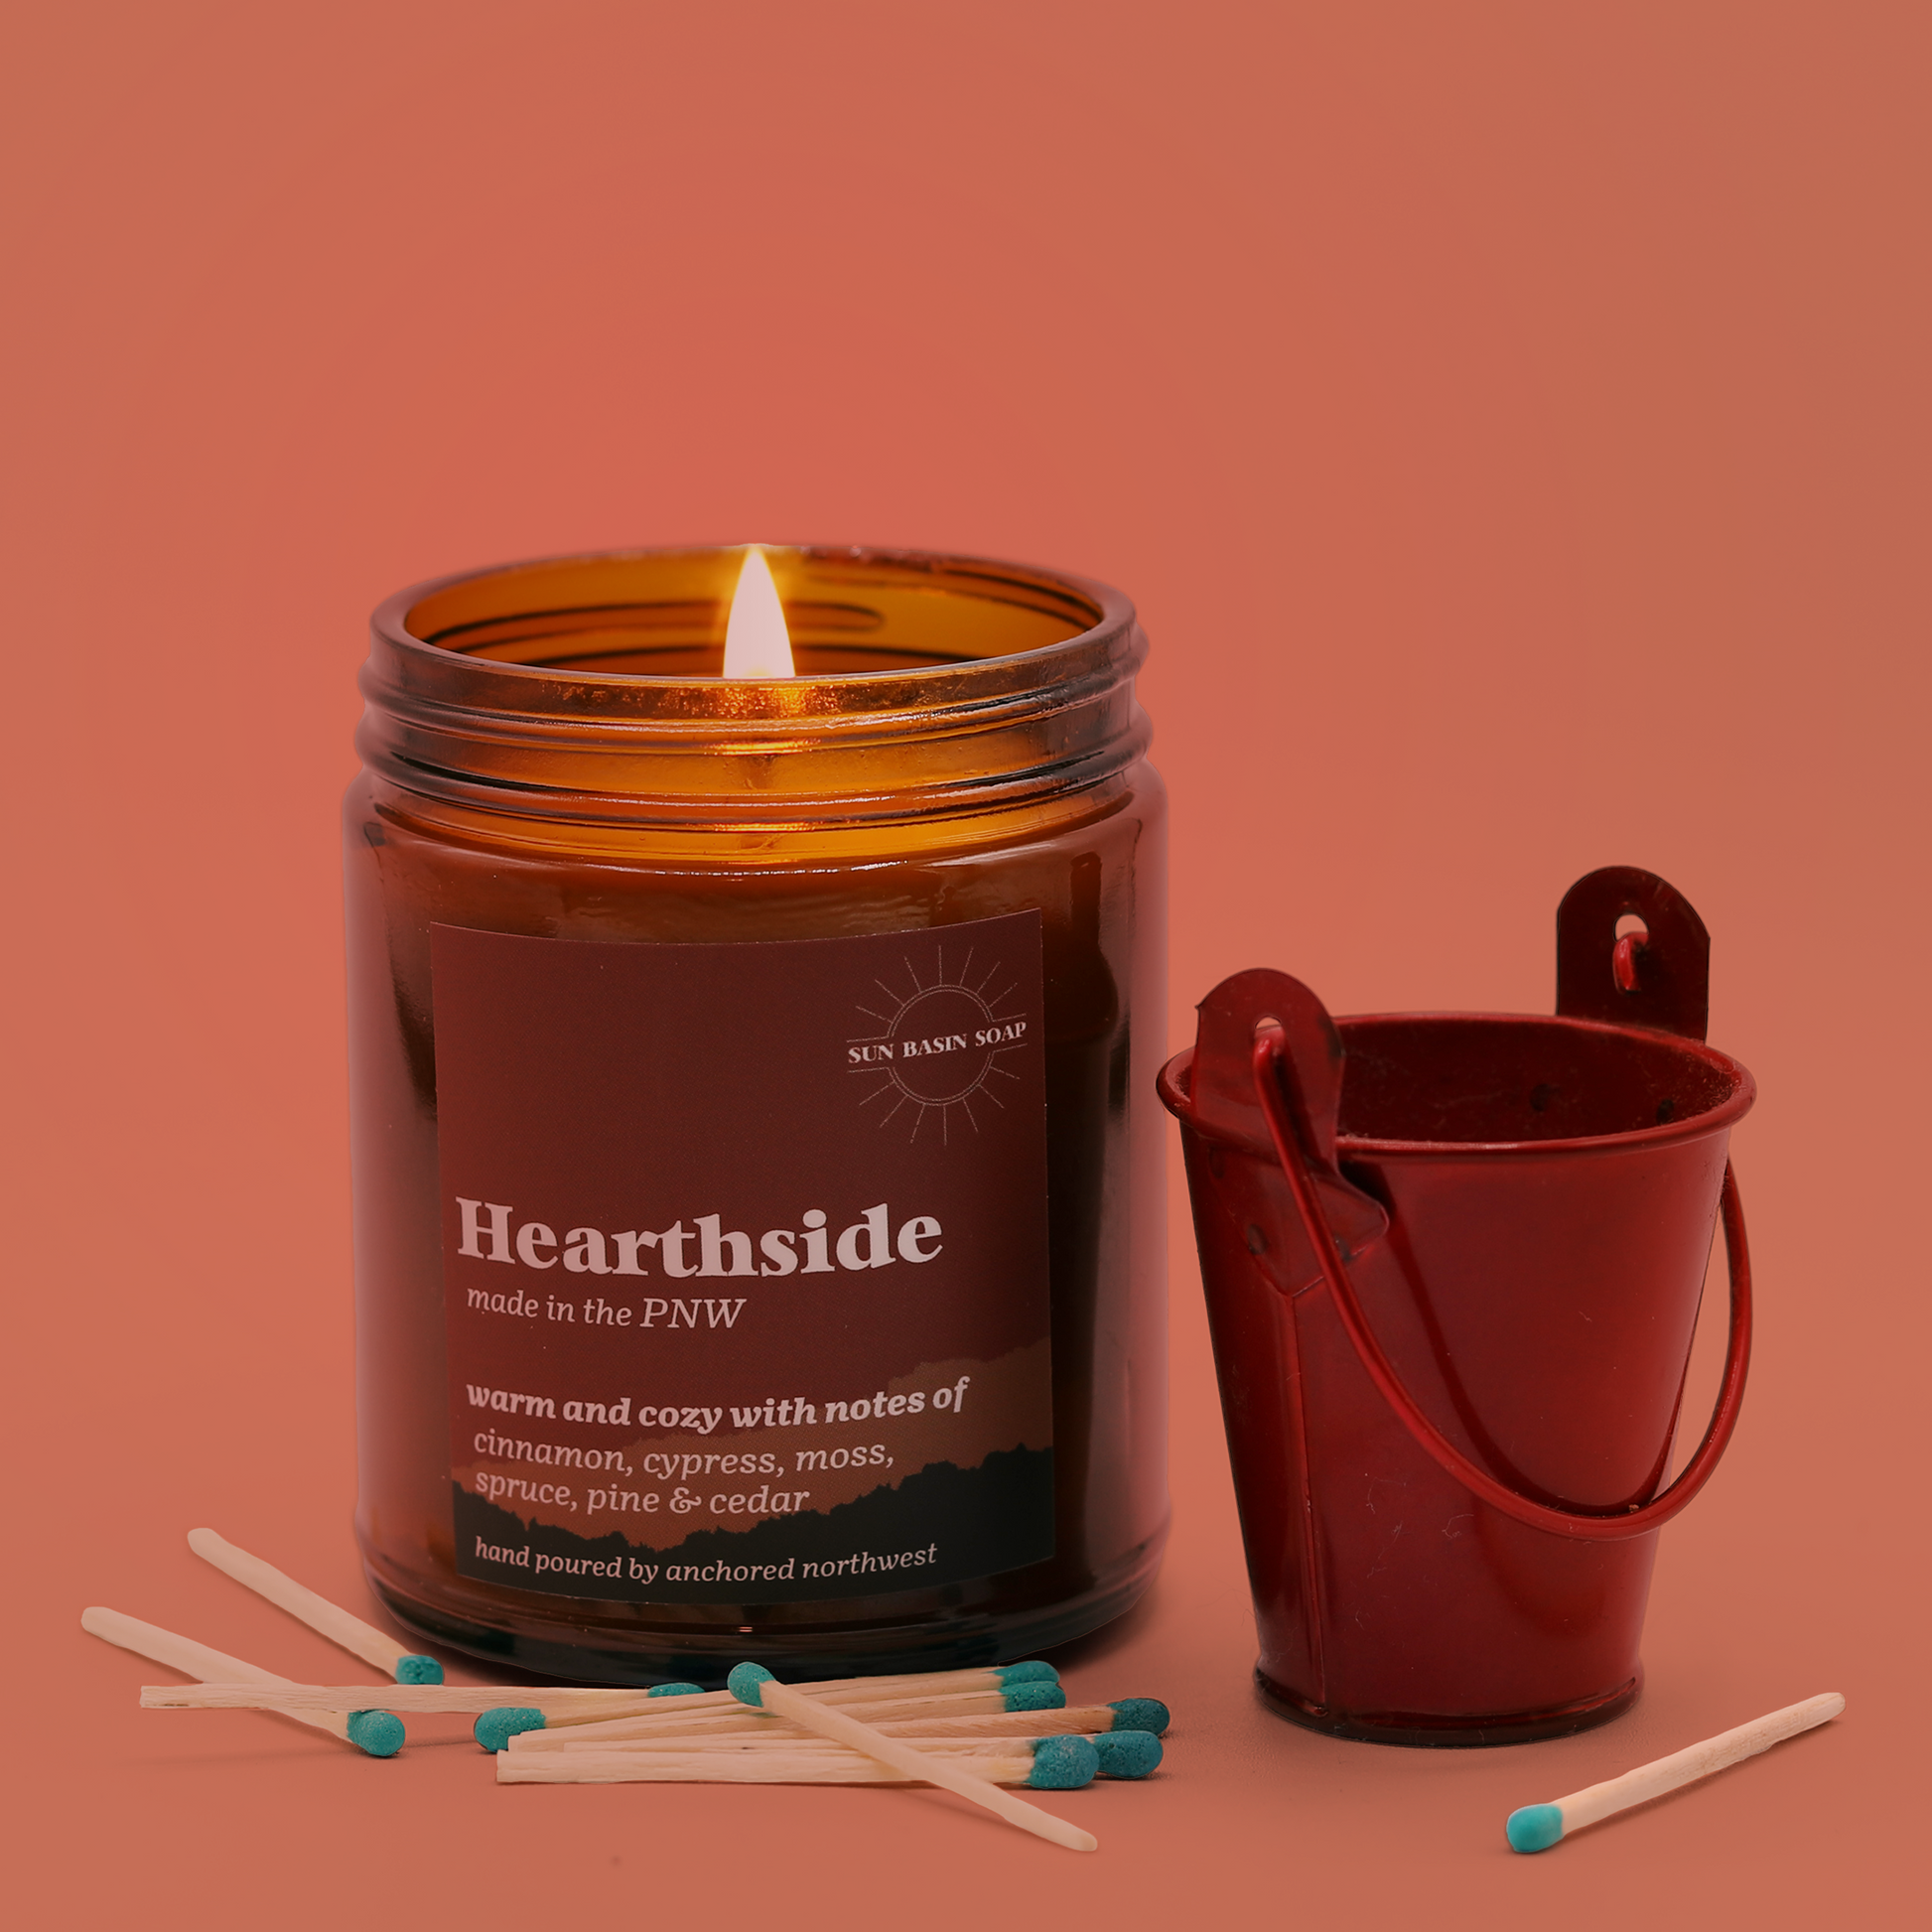 A candle in an amber jar with the text "Hearthside" and the Sun Basin Soap logo sits next to a little red tin, surrounded by matches. A Good Store product. 